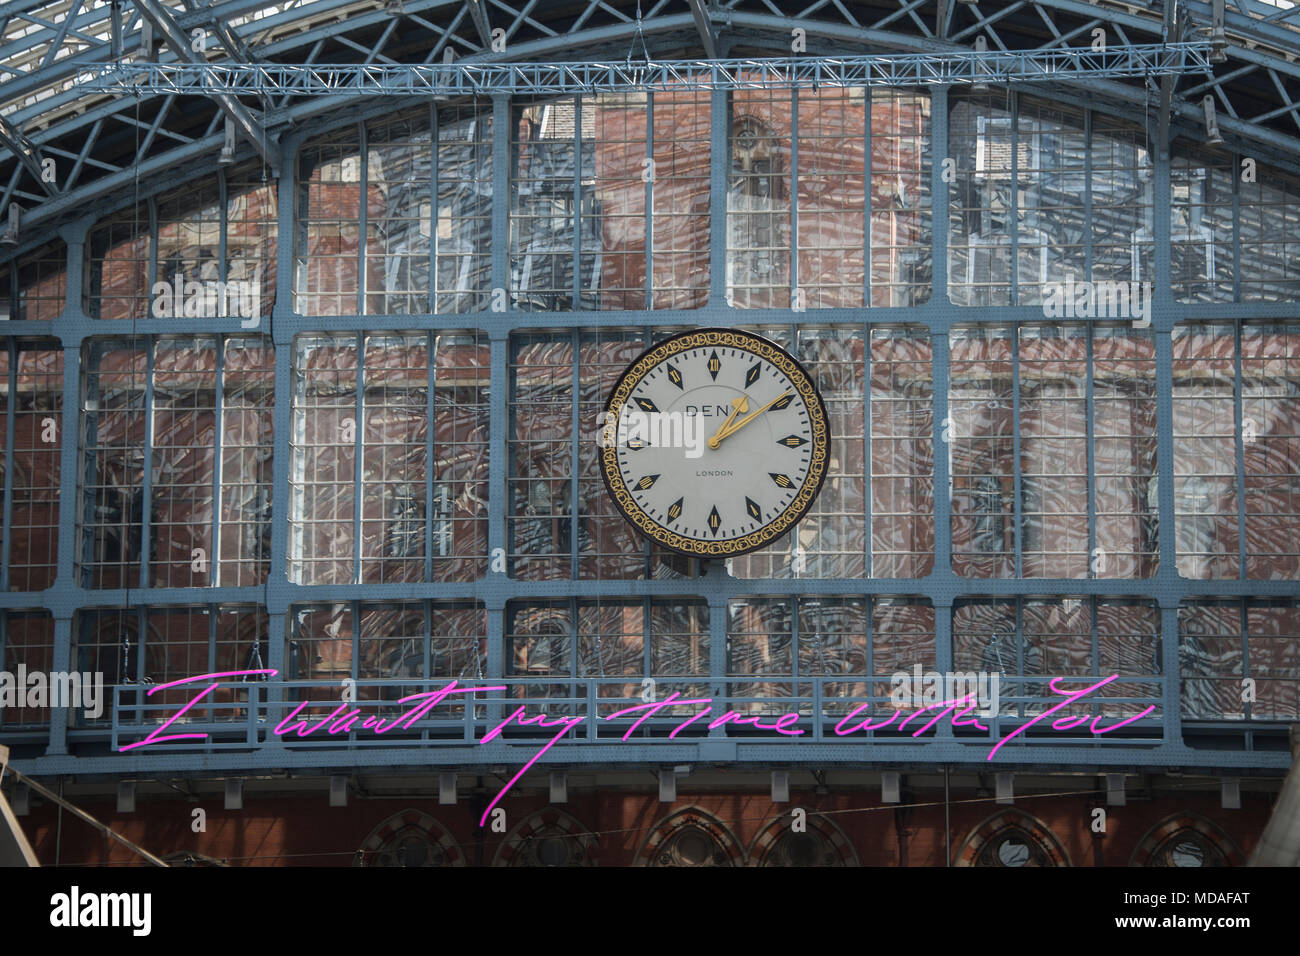 London, UK. 19th April 2018. The new neon artwork by Tracey Emin hangs over the international station at St Pancras - the message for lovers is 'I want my time with you'.Credit: Guy Bell/Alamy Live News Stock Photo